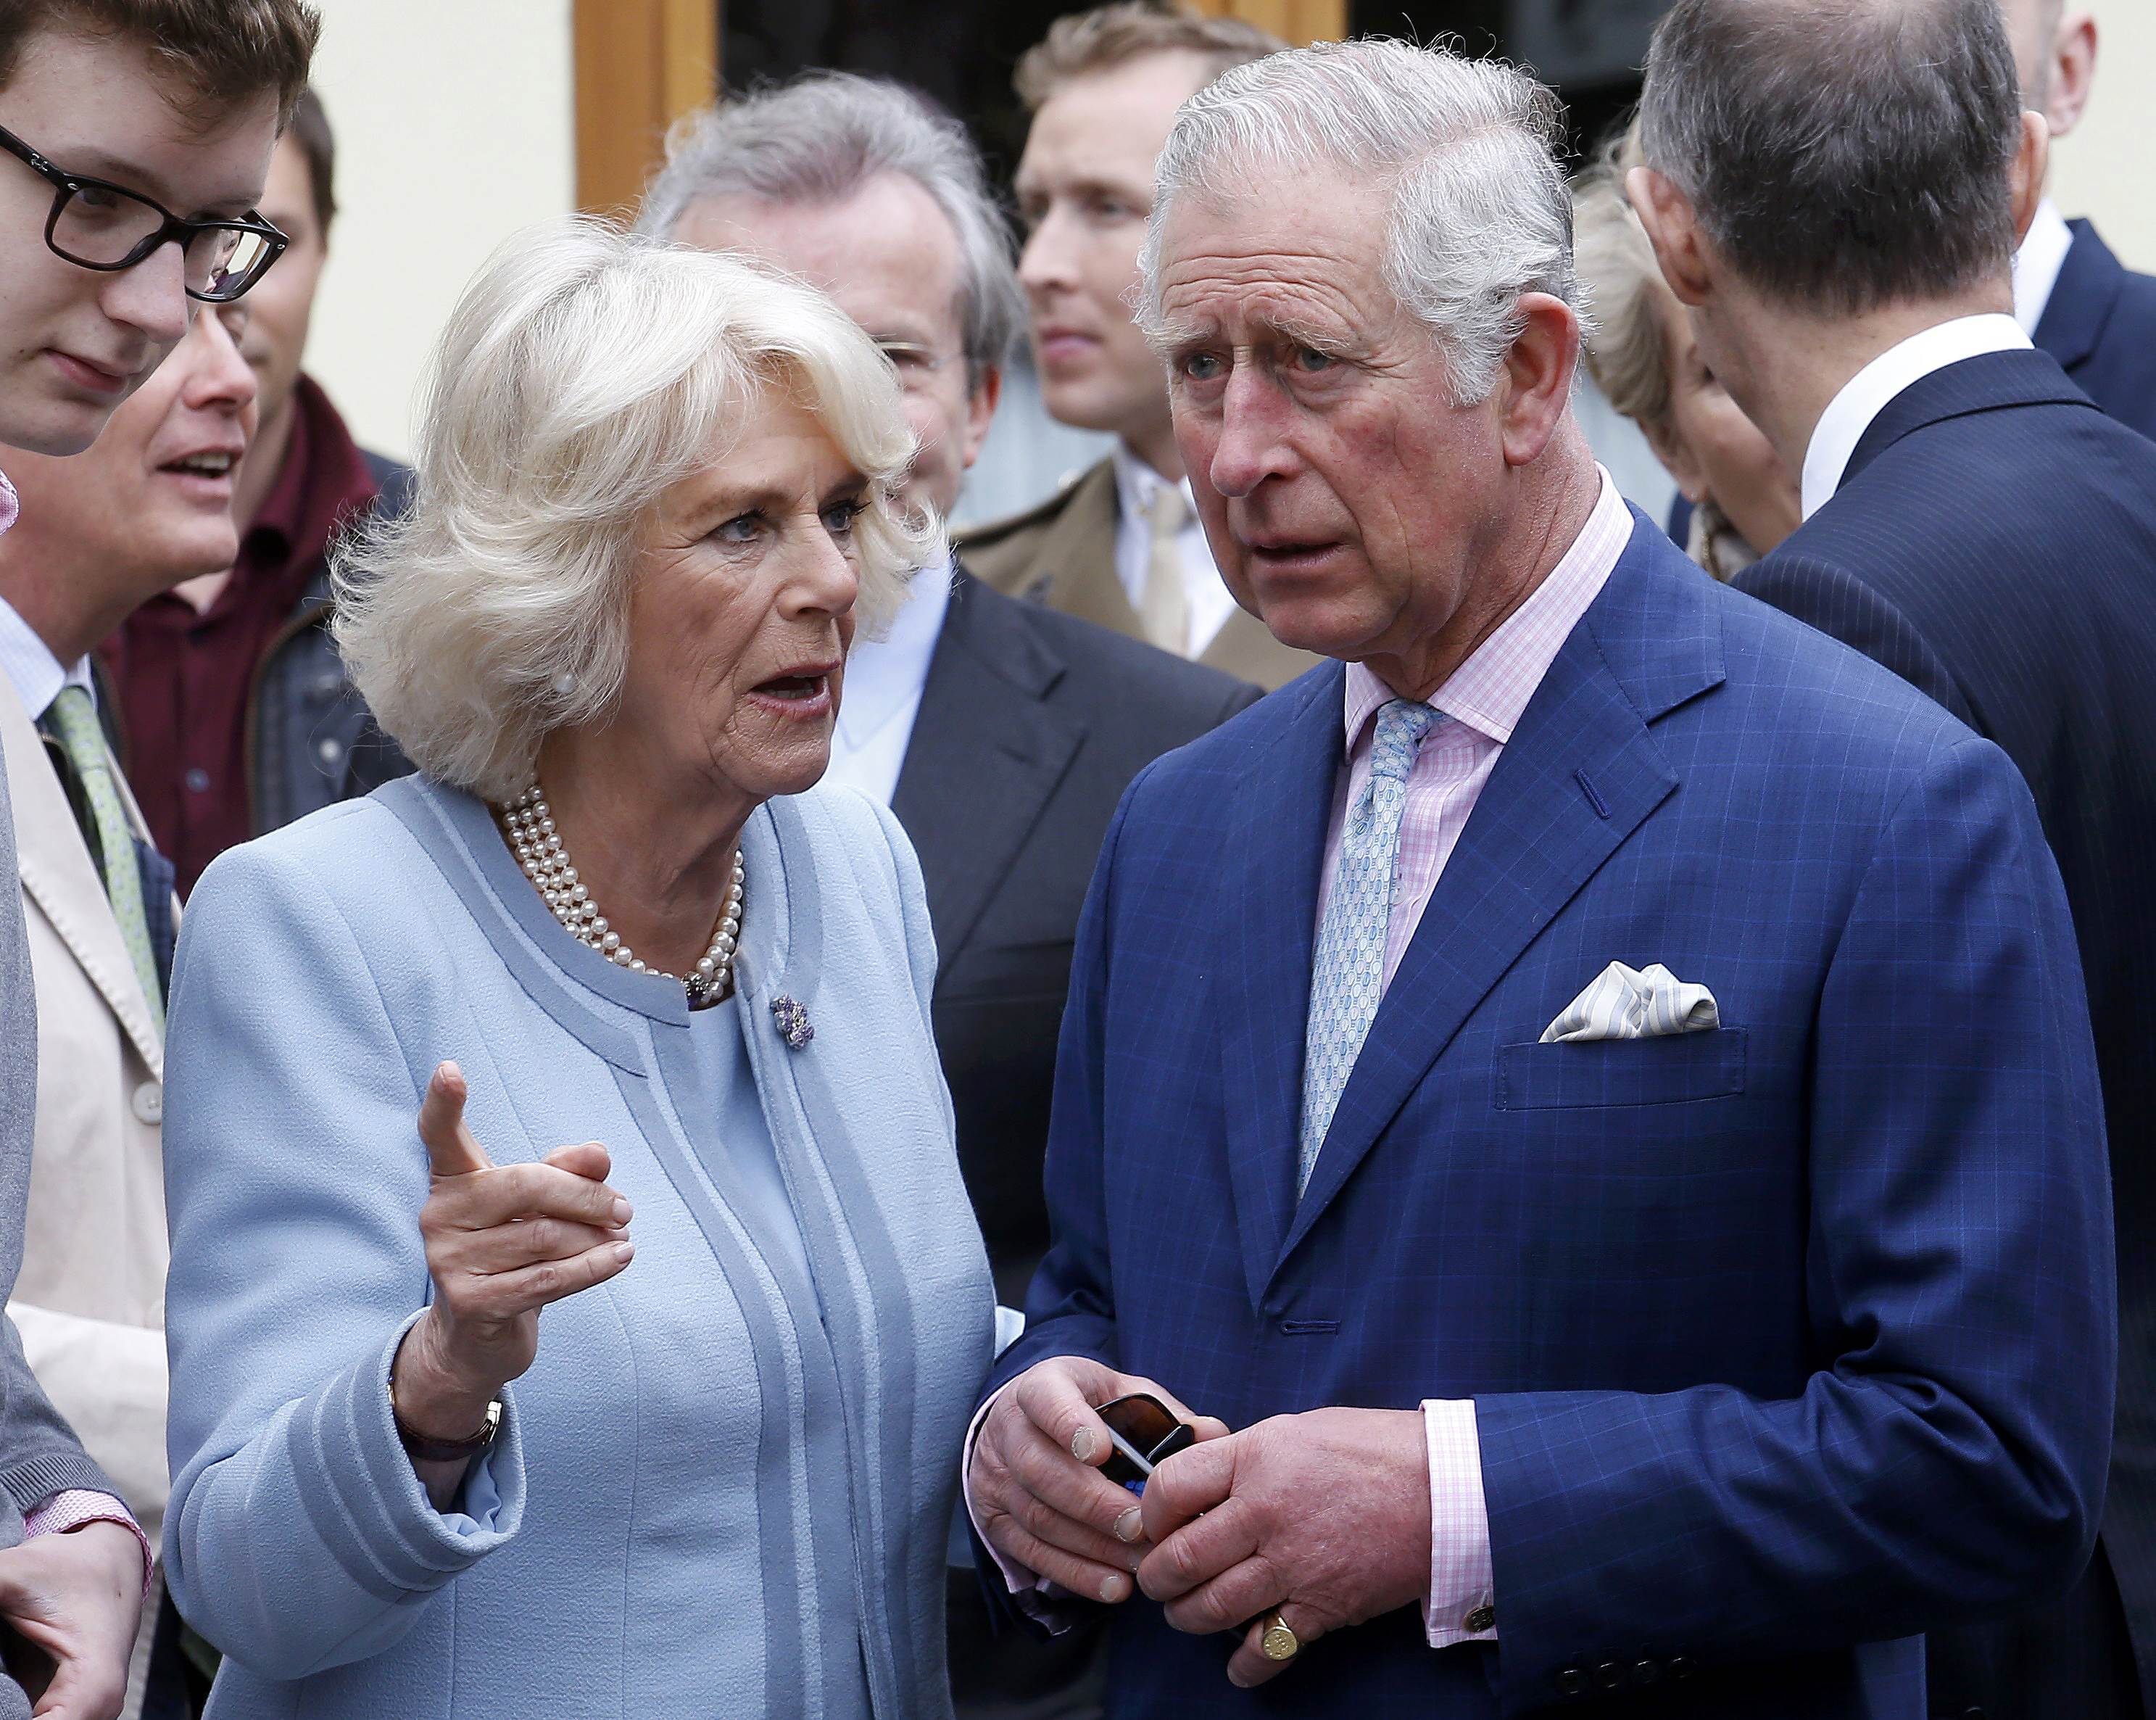 Britain's Prince Charles listens to his wife Camilla, Duchess of Cornwall, as they visit a traditional wine tavern in Vienna, Austria, April 6, 2017. (Heinz-Peter Bader / Reuters)